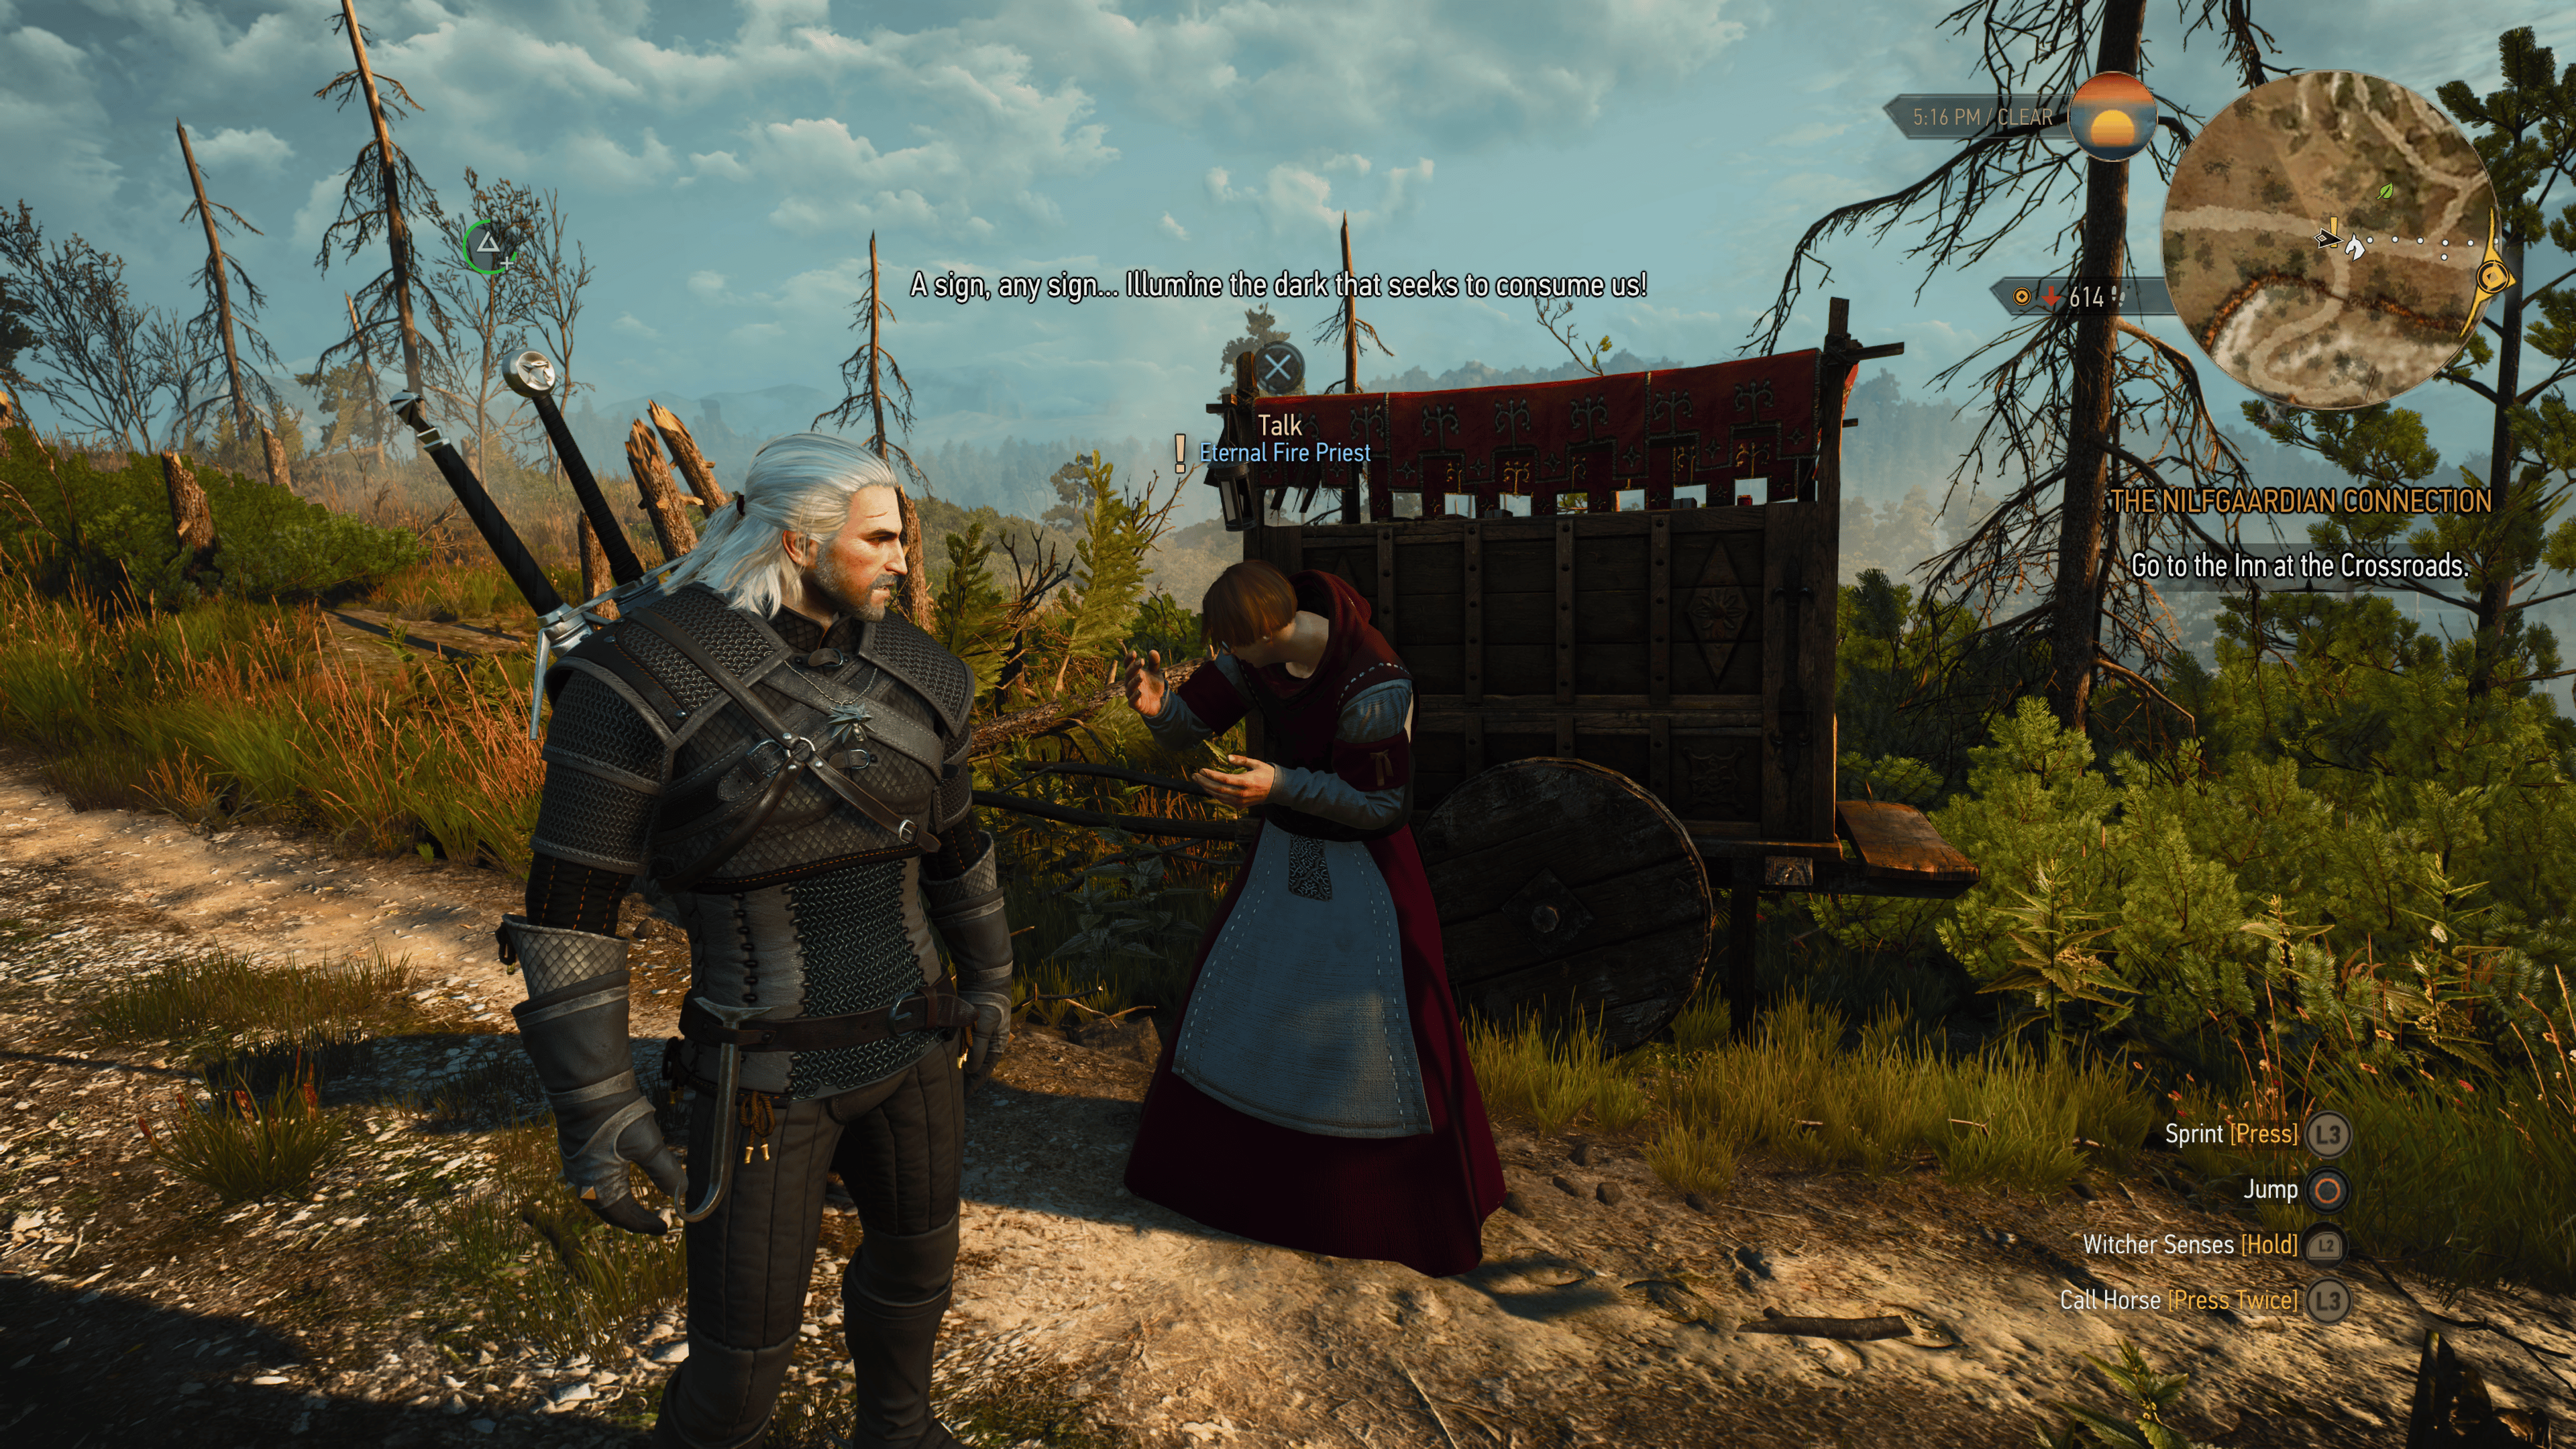 Where to Find The Witcher 3 New Quest for Netflix Armor - MP1st